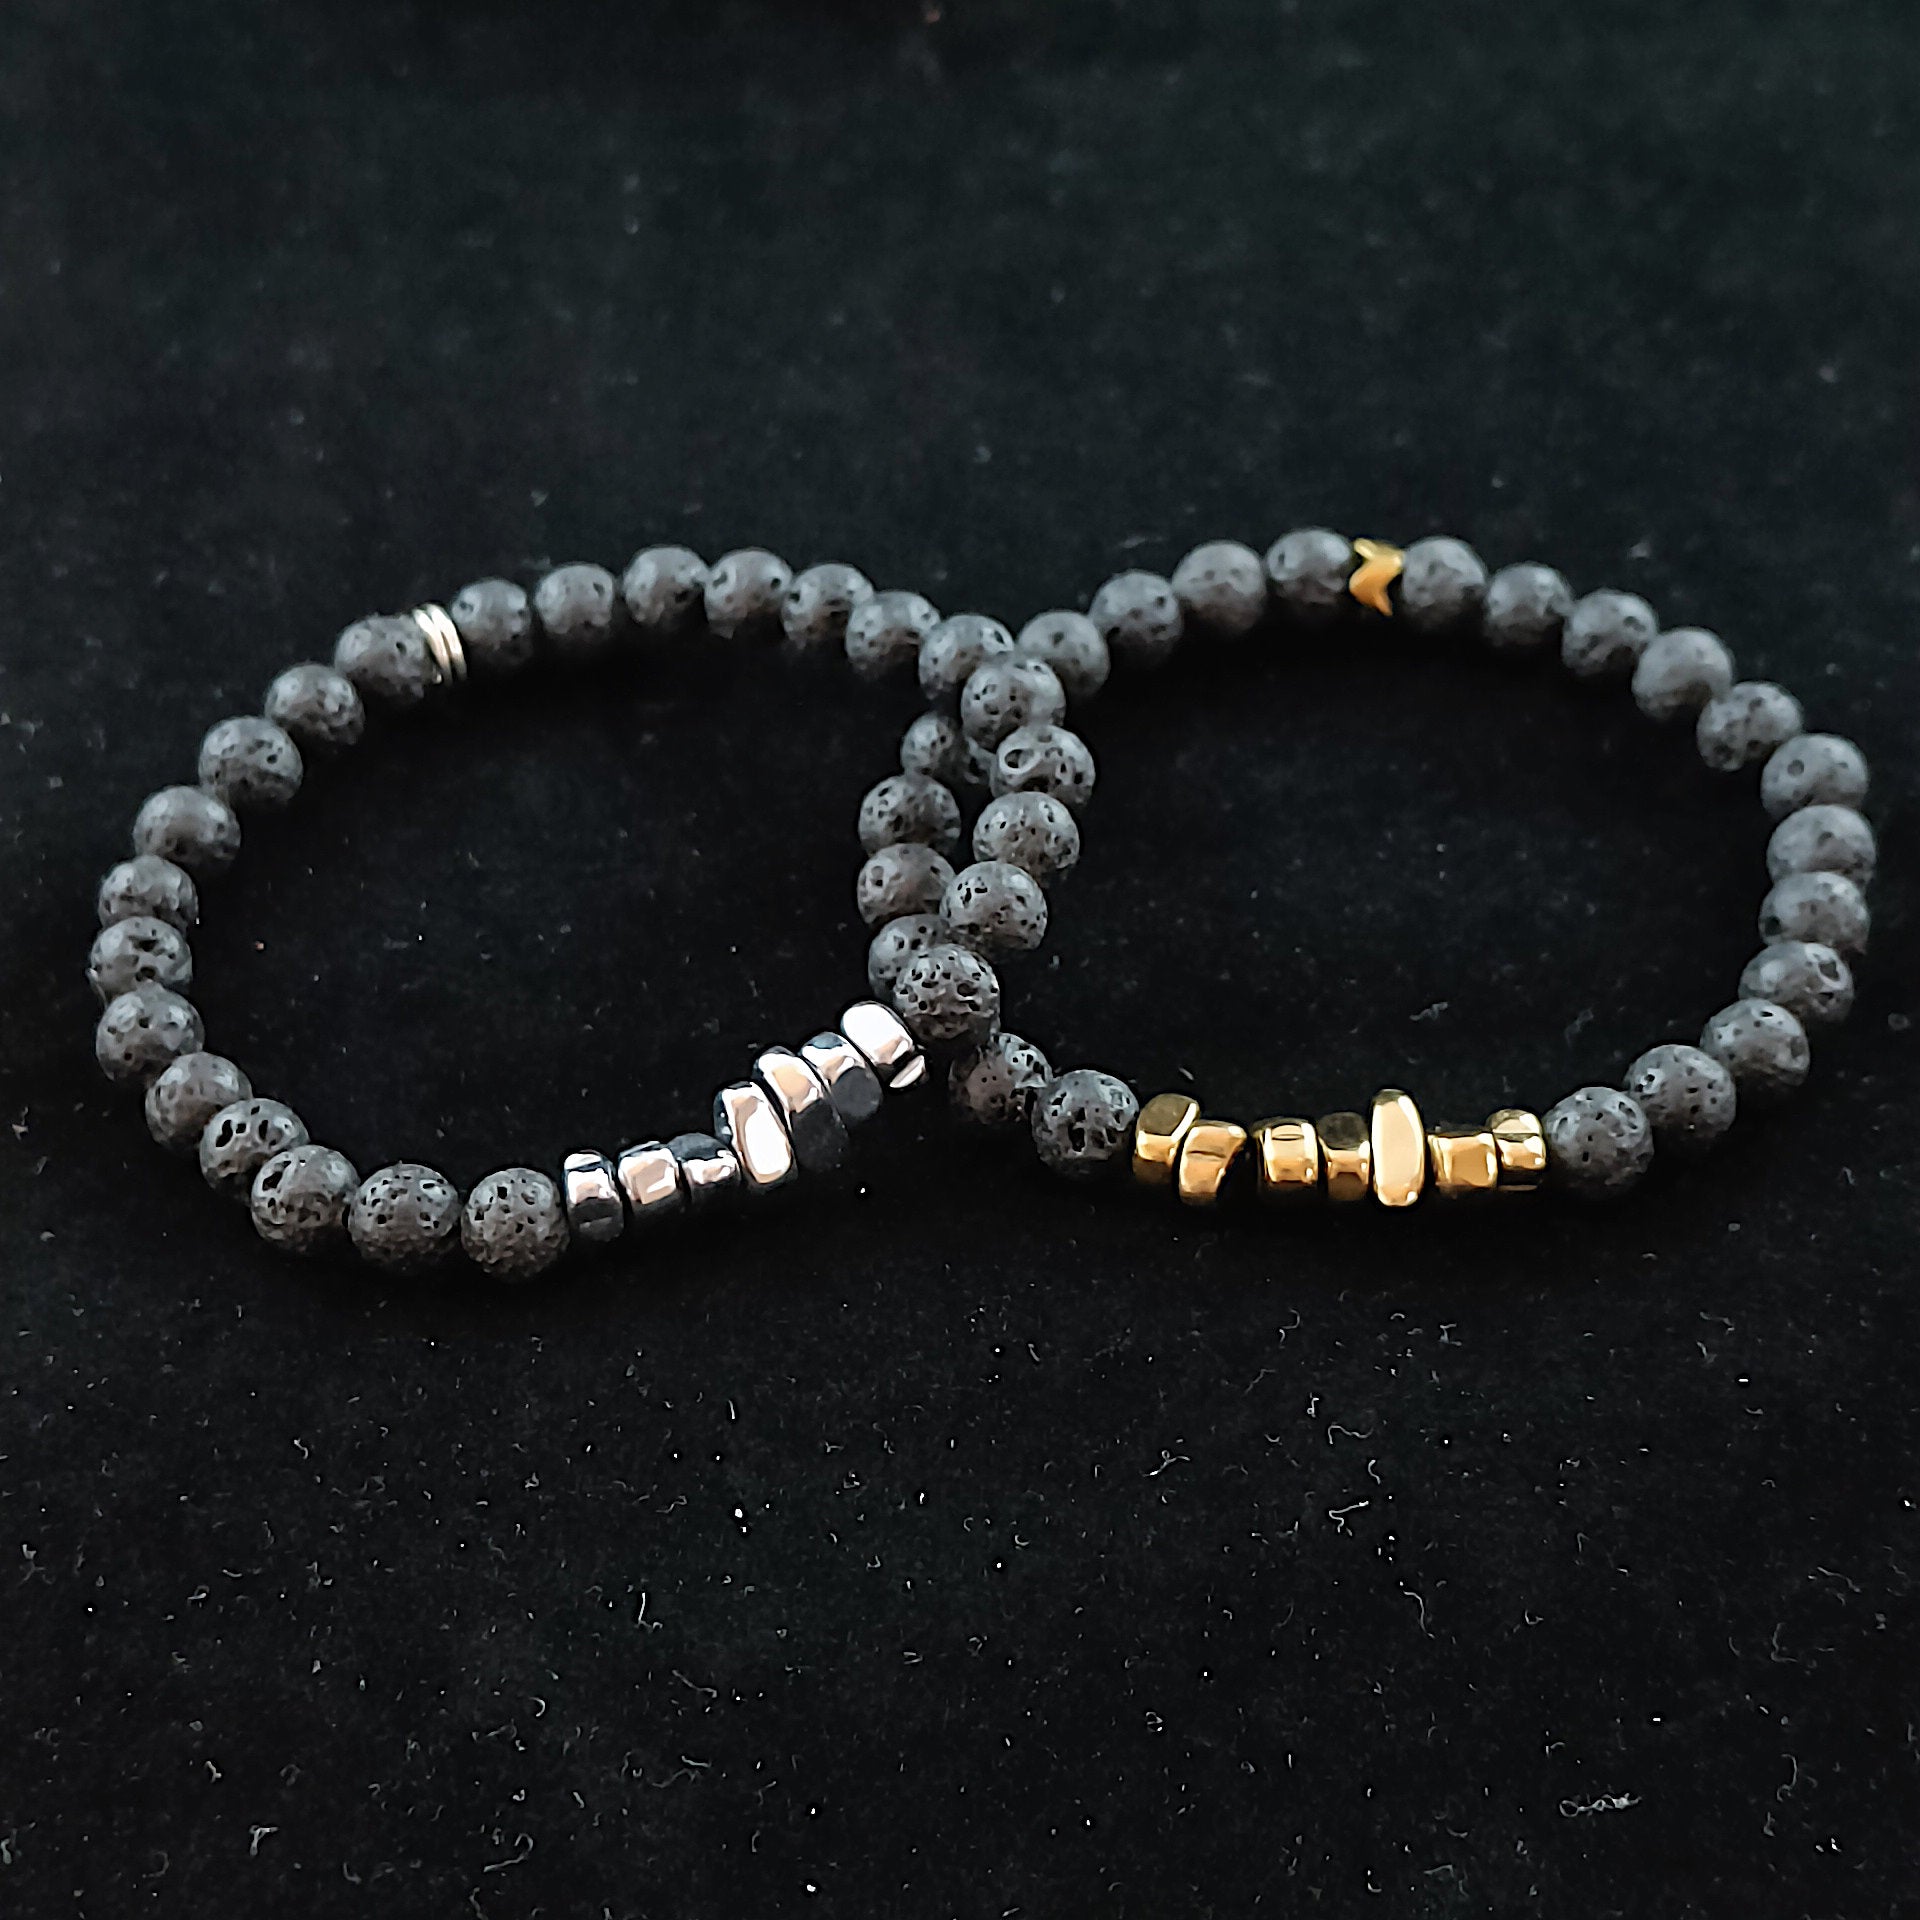 two bracelets sitting on a black cloth. Both bracelets are made with lava beads and in the center are colored shards pieces. On the right bracelet they're colored golden but on the left bracelet they're silver colored.